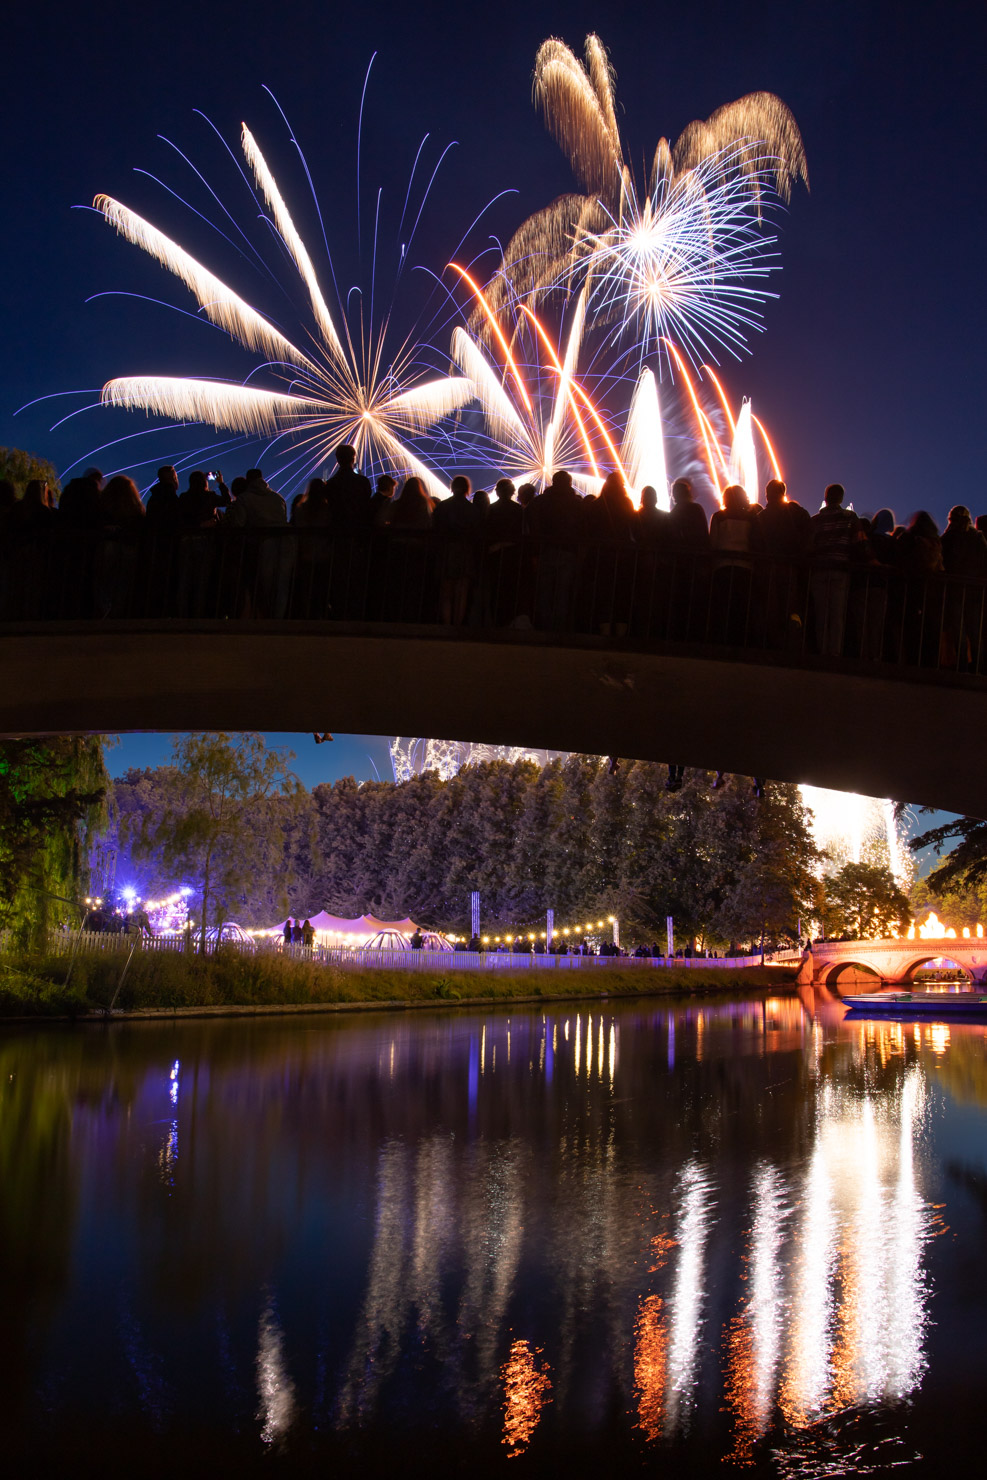 Trinity May Ball fireworks are one of the best sights of May week. I managed to get a spot low down by the Trinity Hall punts so I could capture the crowd of people packed onto Garrett Hostel Bridge to watch the show.